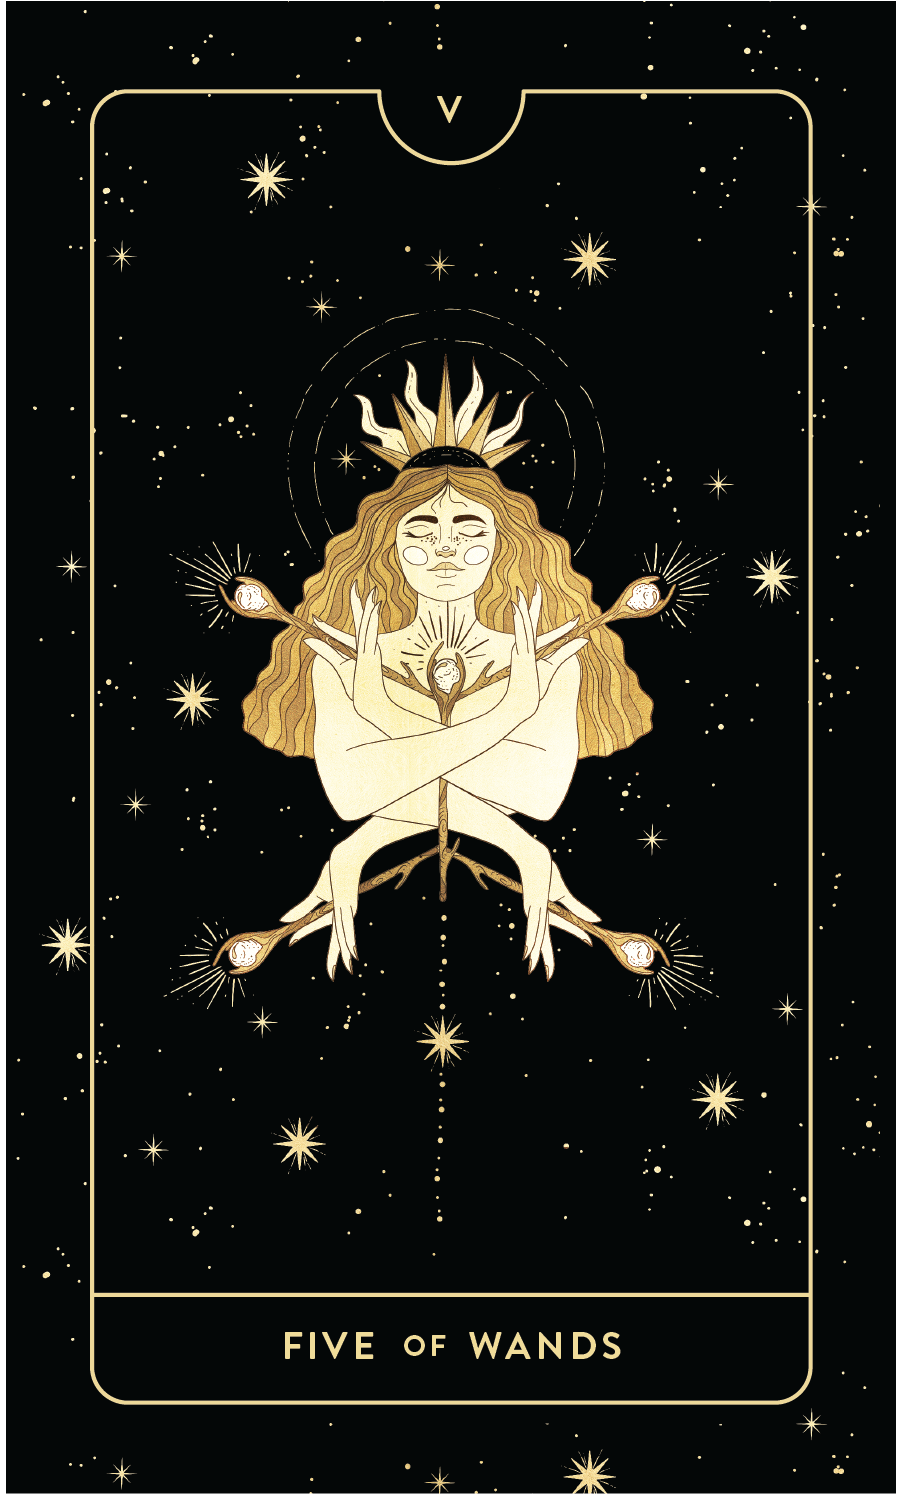 FIVE OF WANDS